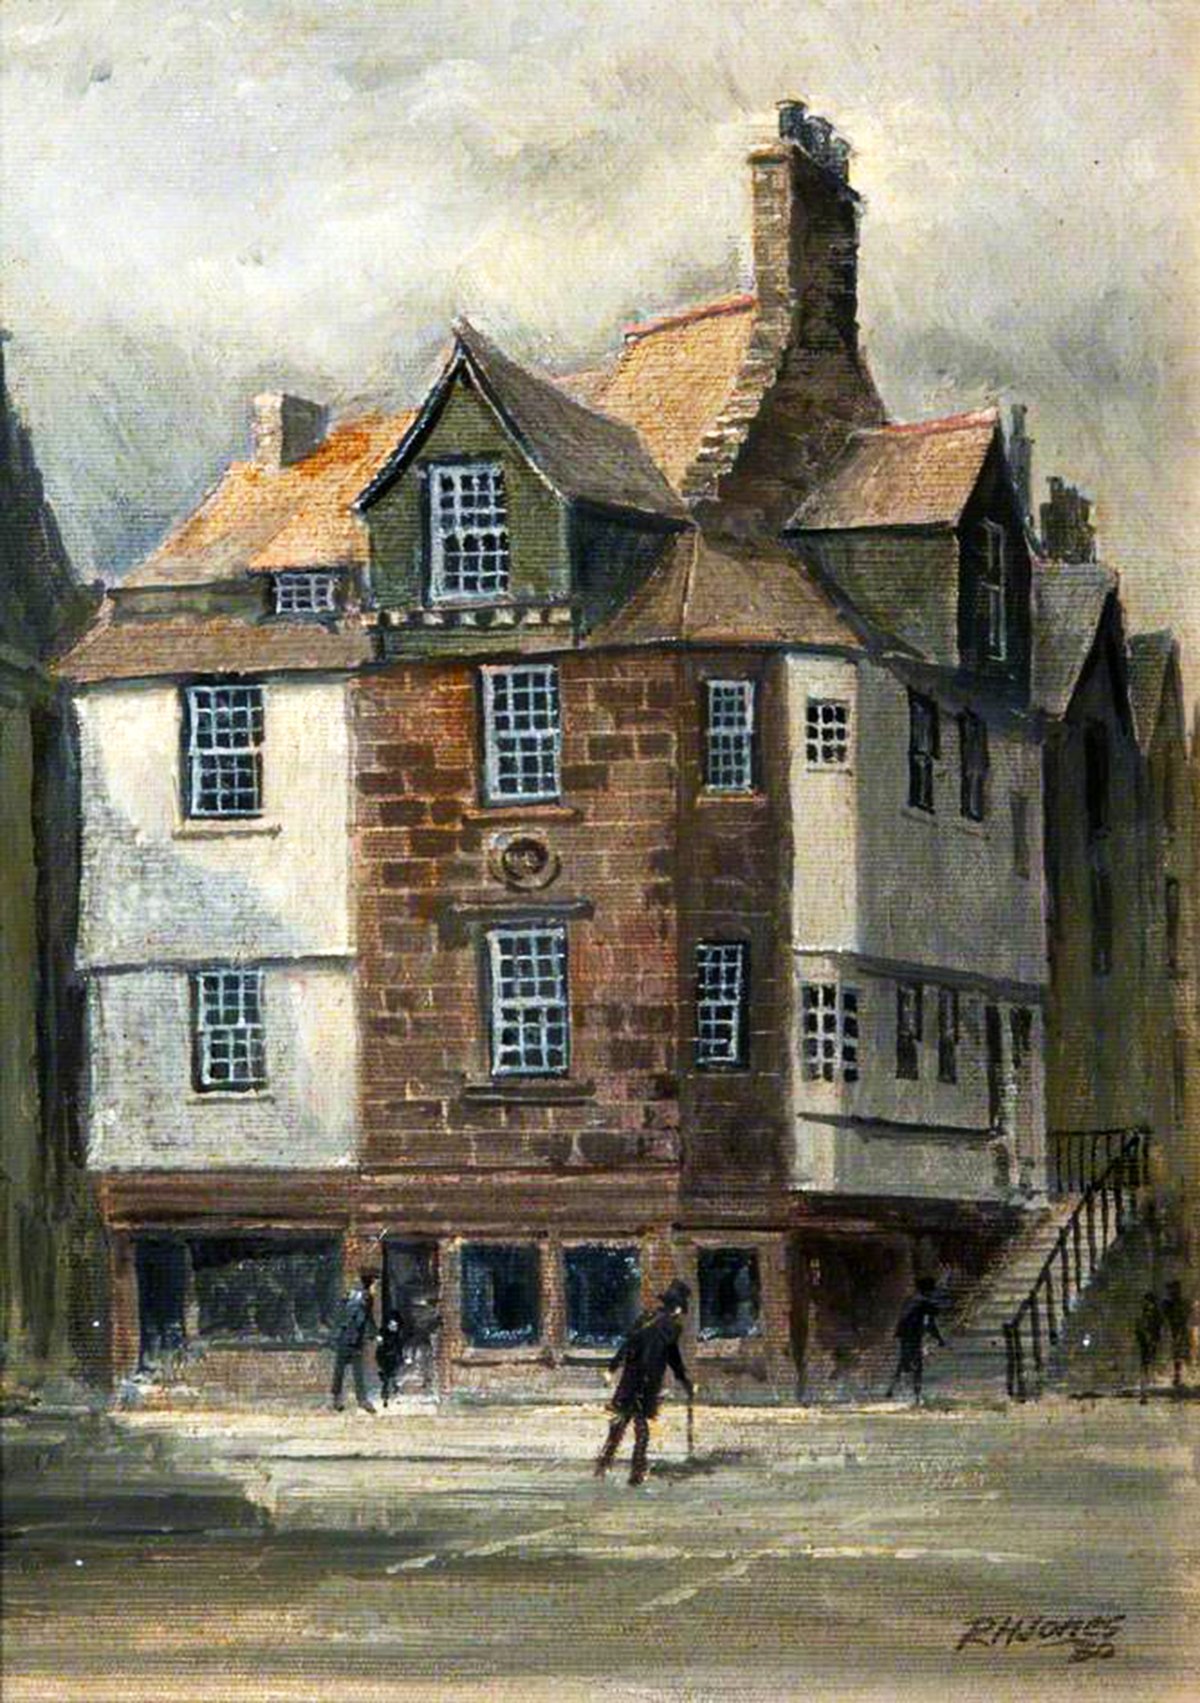 Painting depicting a historic brick building – John Knox House on Edinburgh High Street with a prominent gabled roof and dormer windows. The facade has ornate detailing and a crest-like symbol.